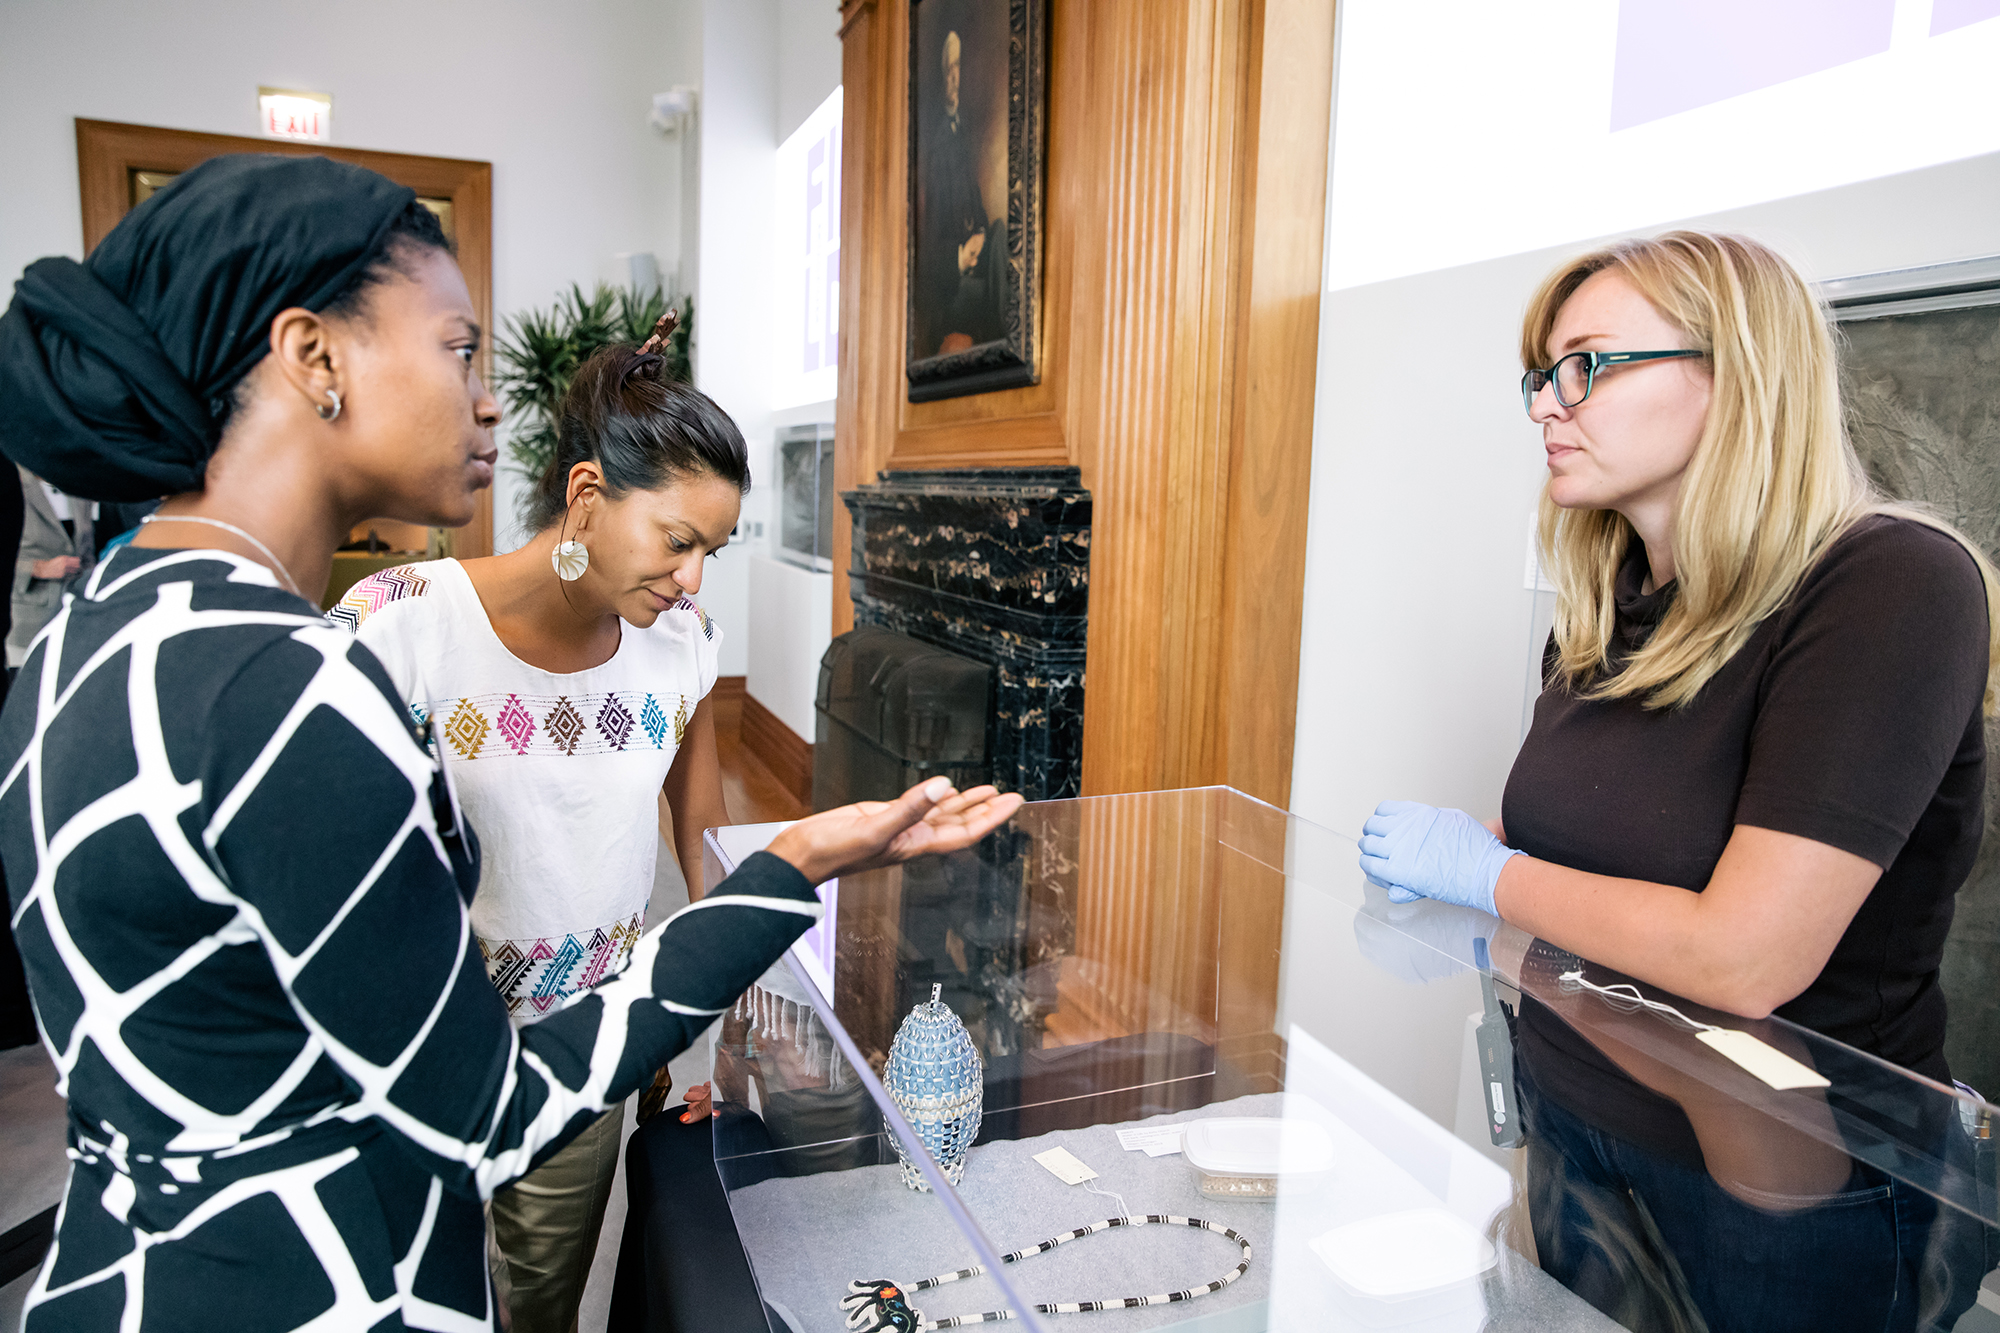 Two attendees and a museum staff member talk over a case filled with objects from the Field Museum's collections